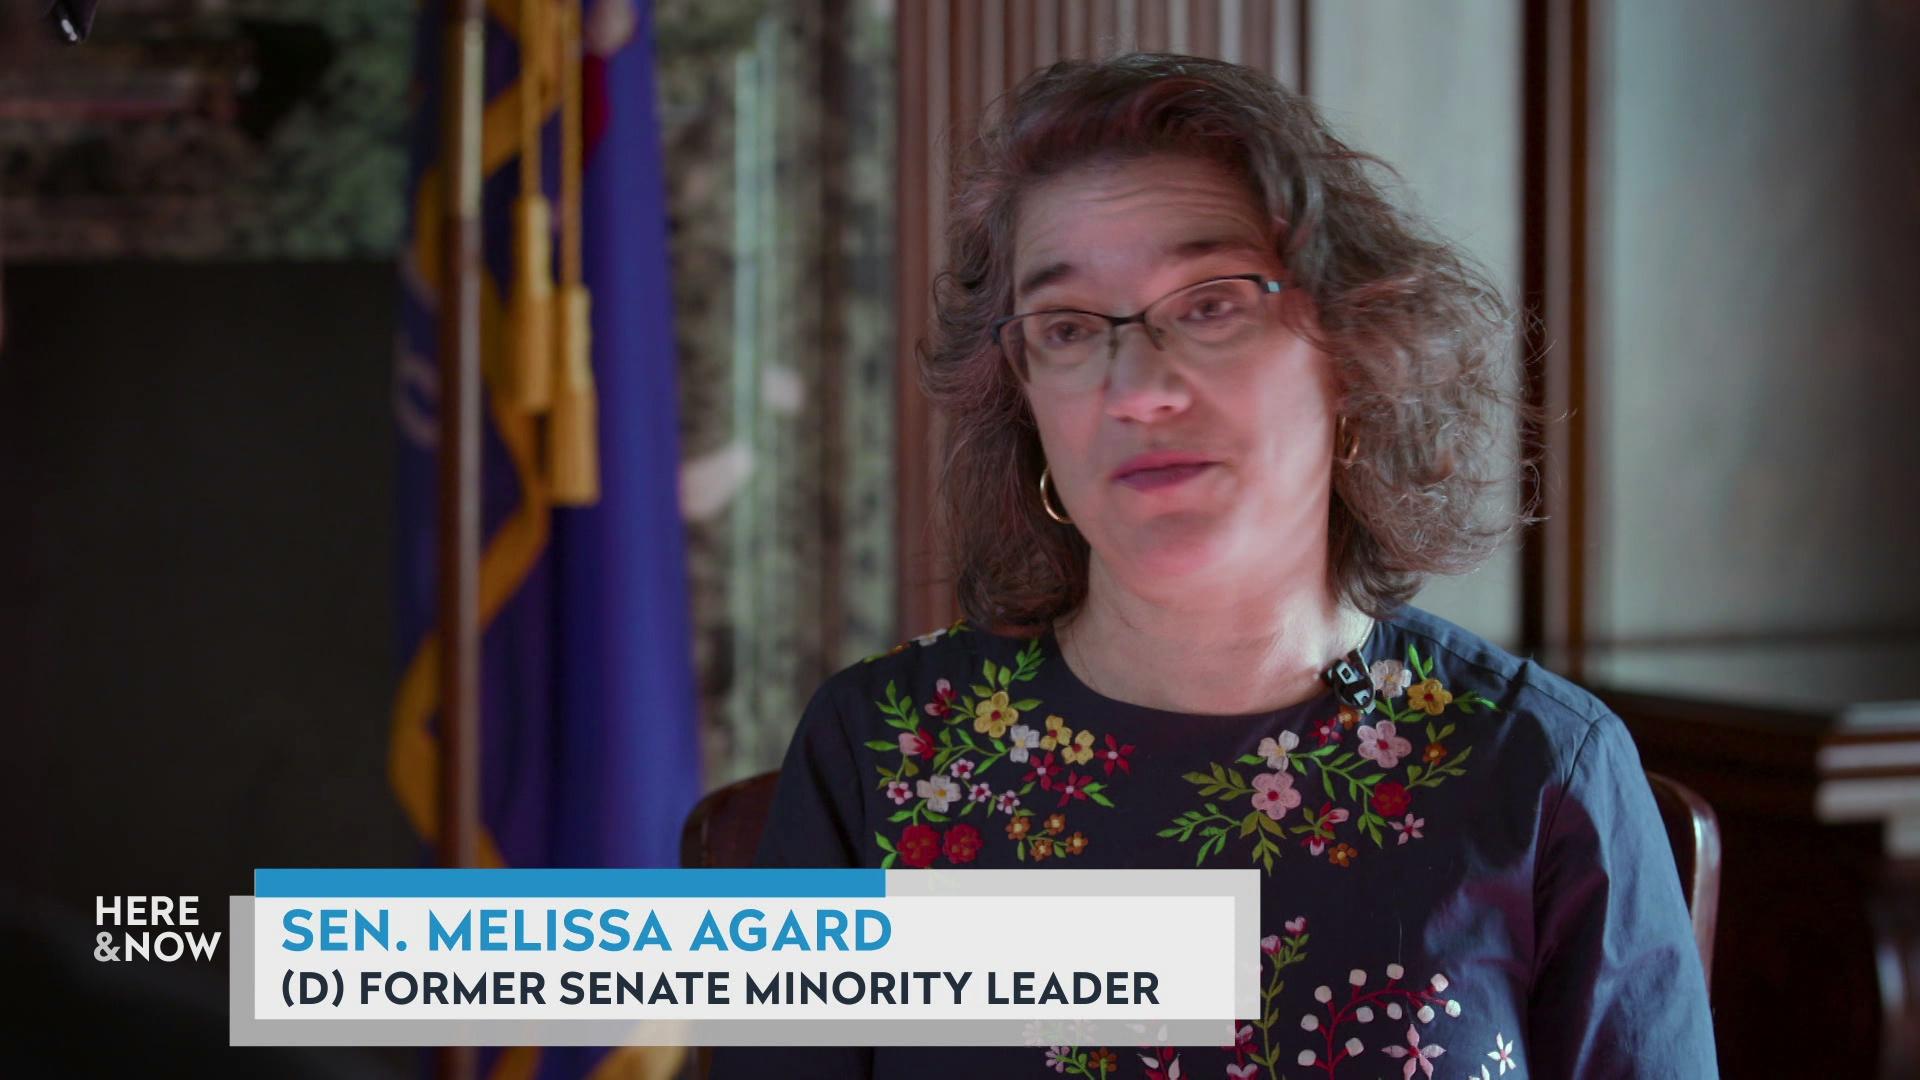 A still image from a video shows Melissa Agard seated in front of a marble wall and Wisconsin state flag with a graphic at bottom reading 'Sen. Melissa Agard' and '(D) Former Senate Minority Leader.'